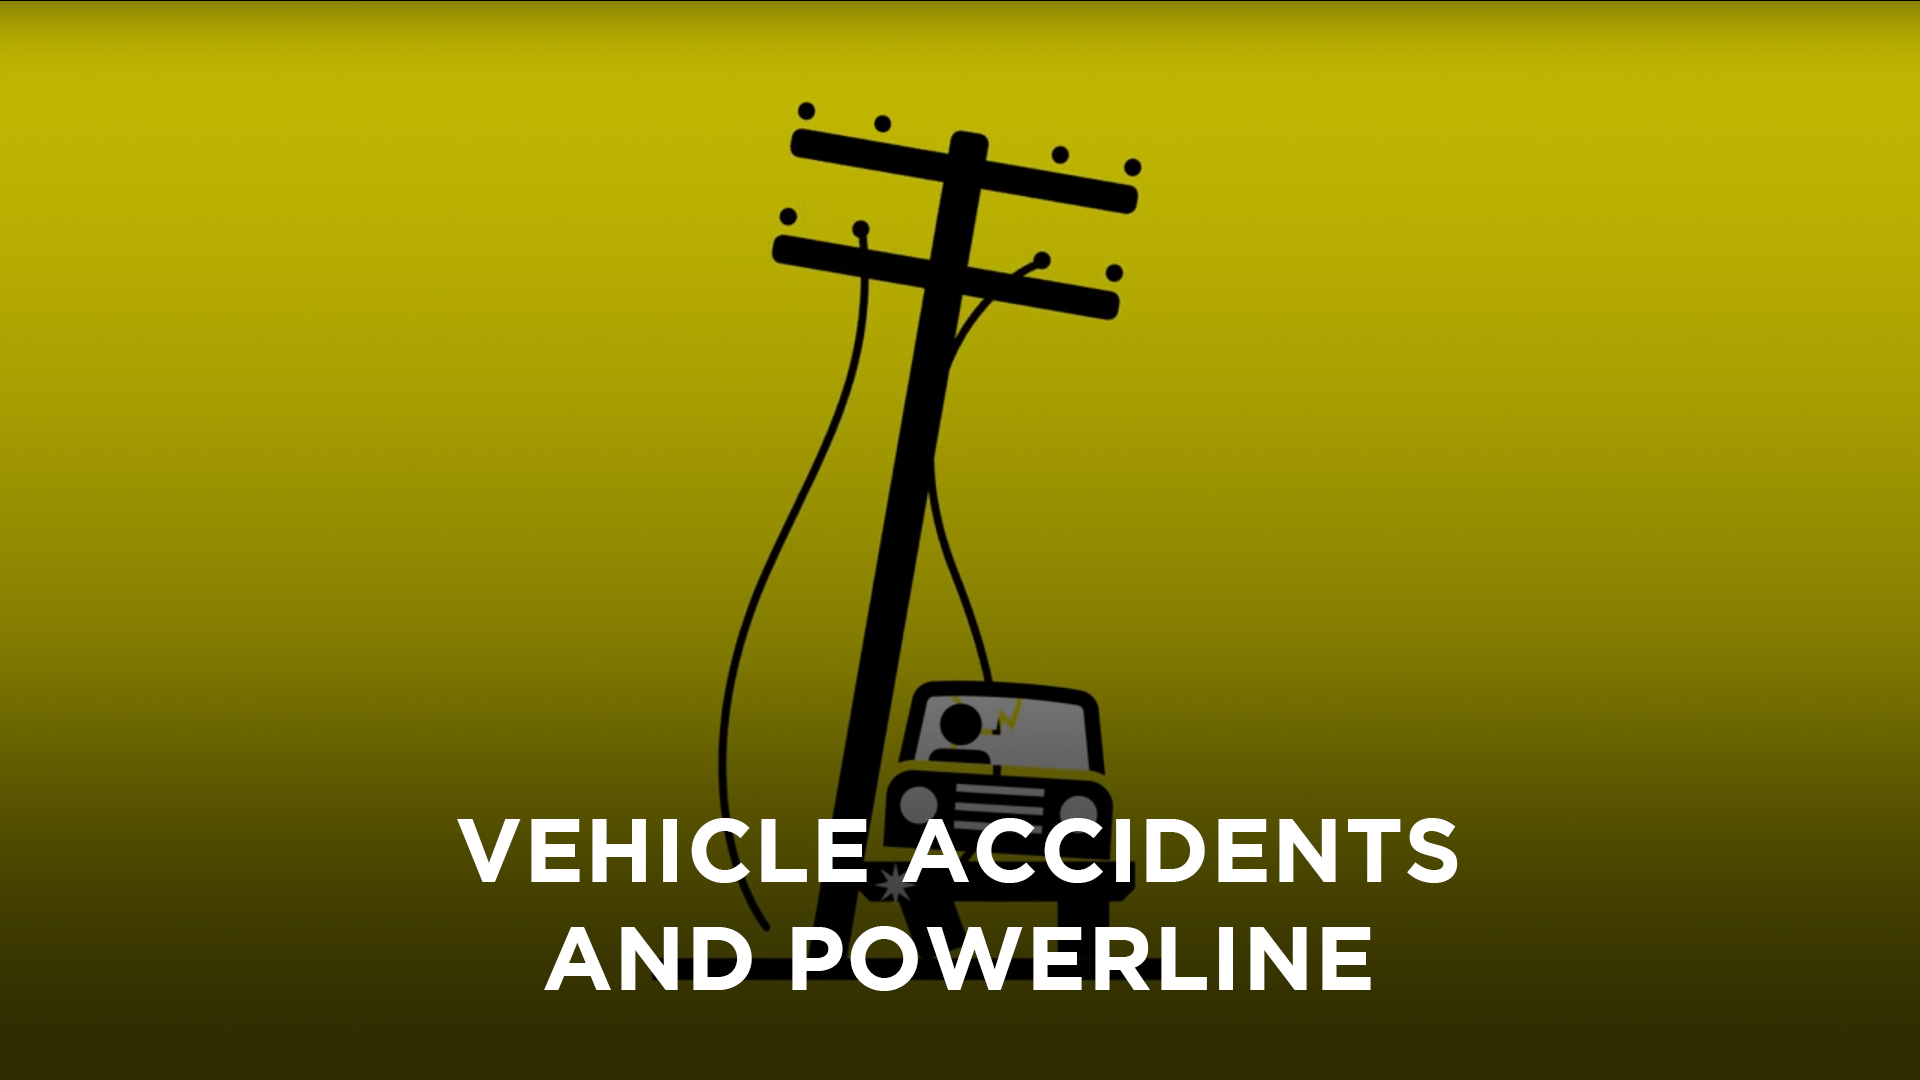 Vehicle accidents and powerlines